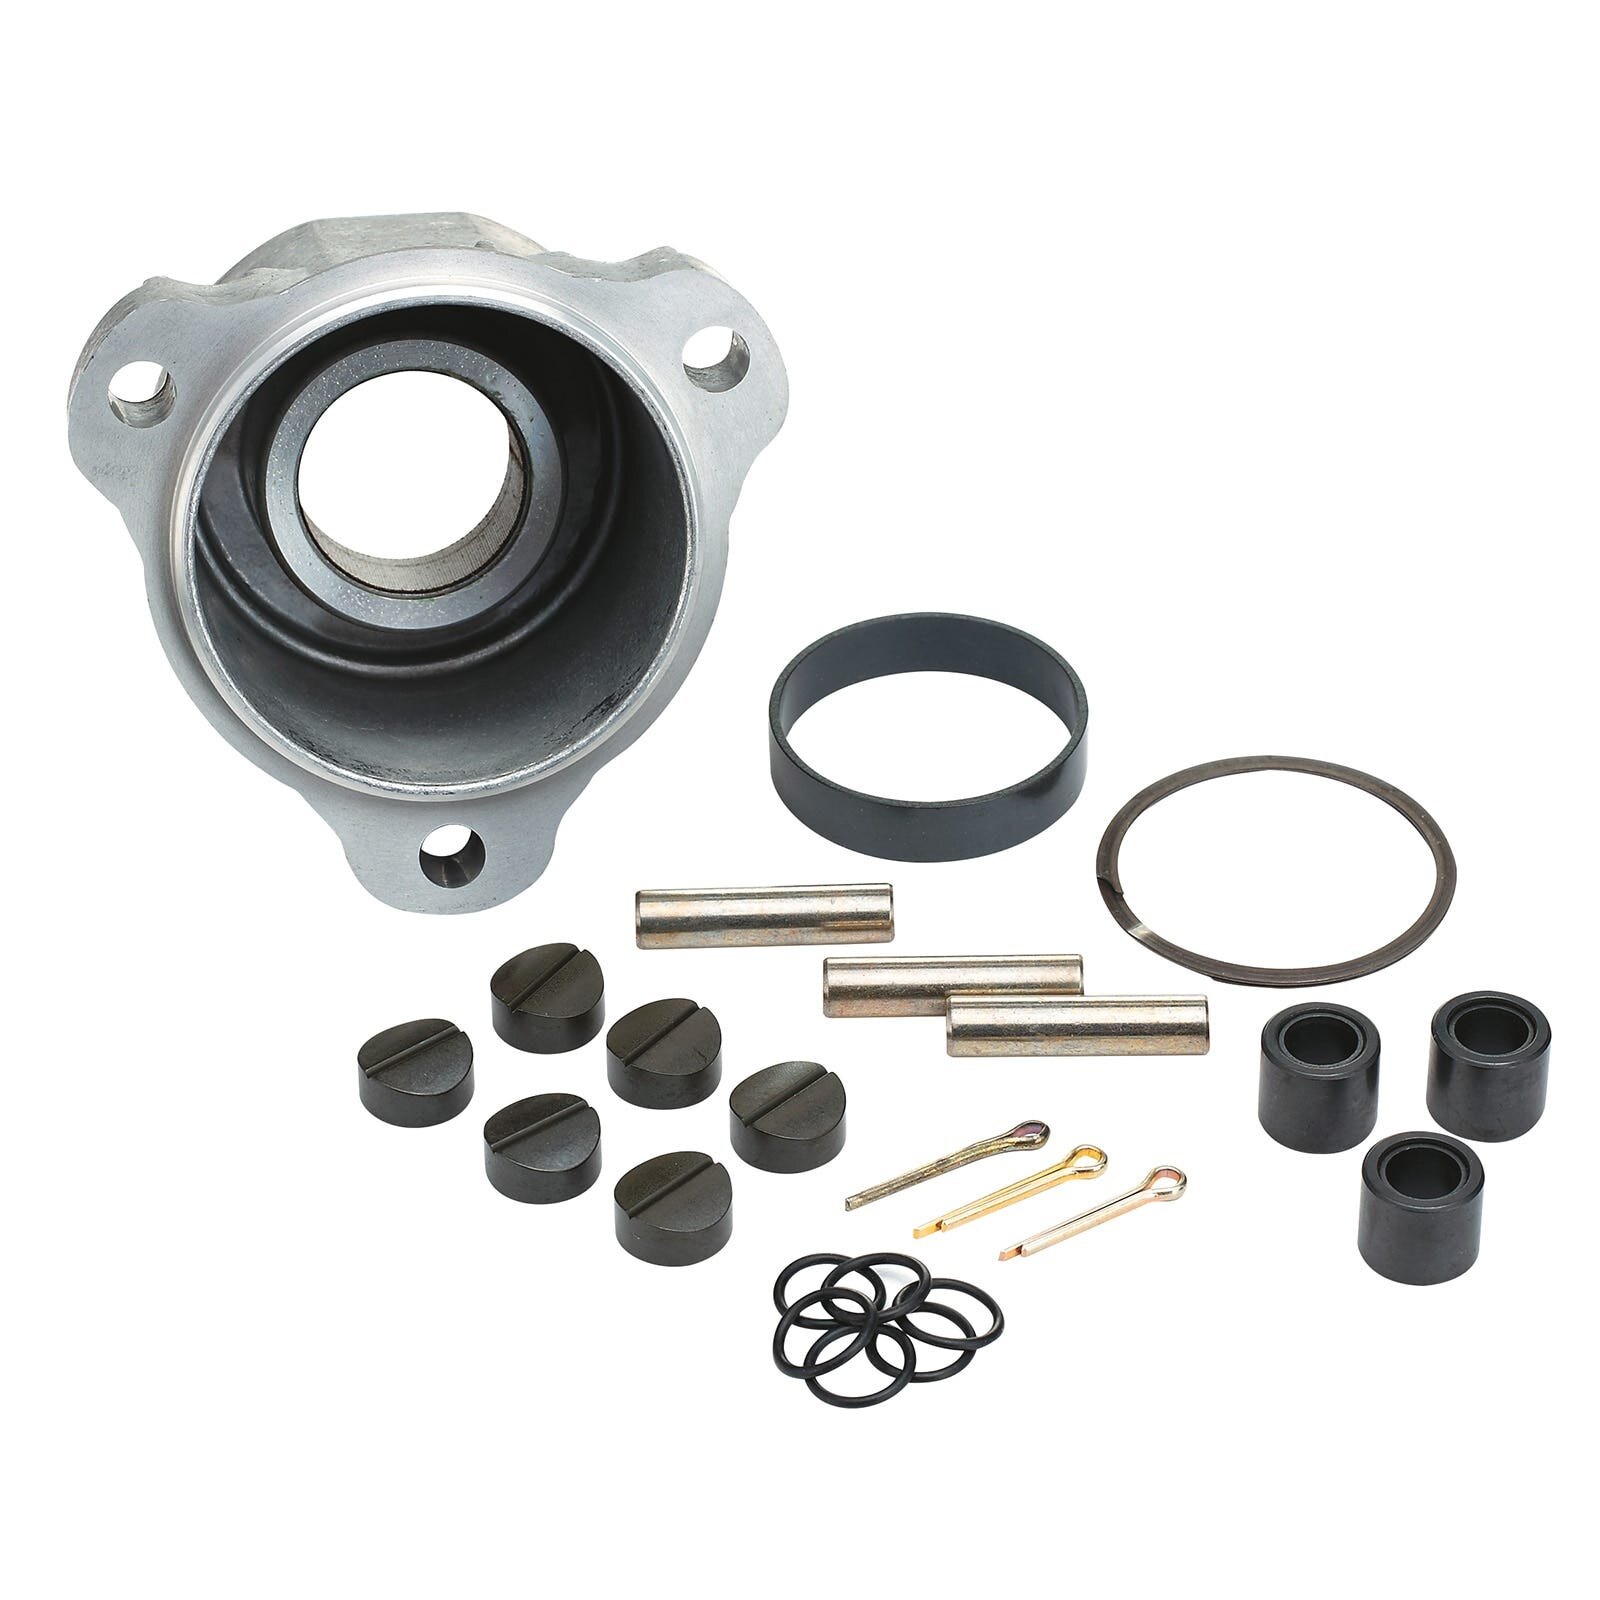 Maintenance Kit for TRA Drive Pulley 2011 to 2018 (800R P TEK & 800R E TEC)